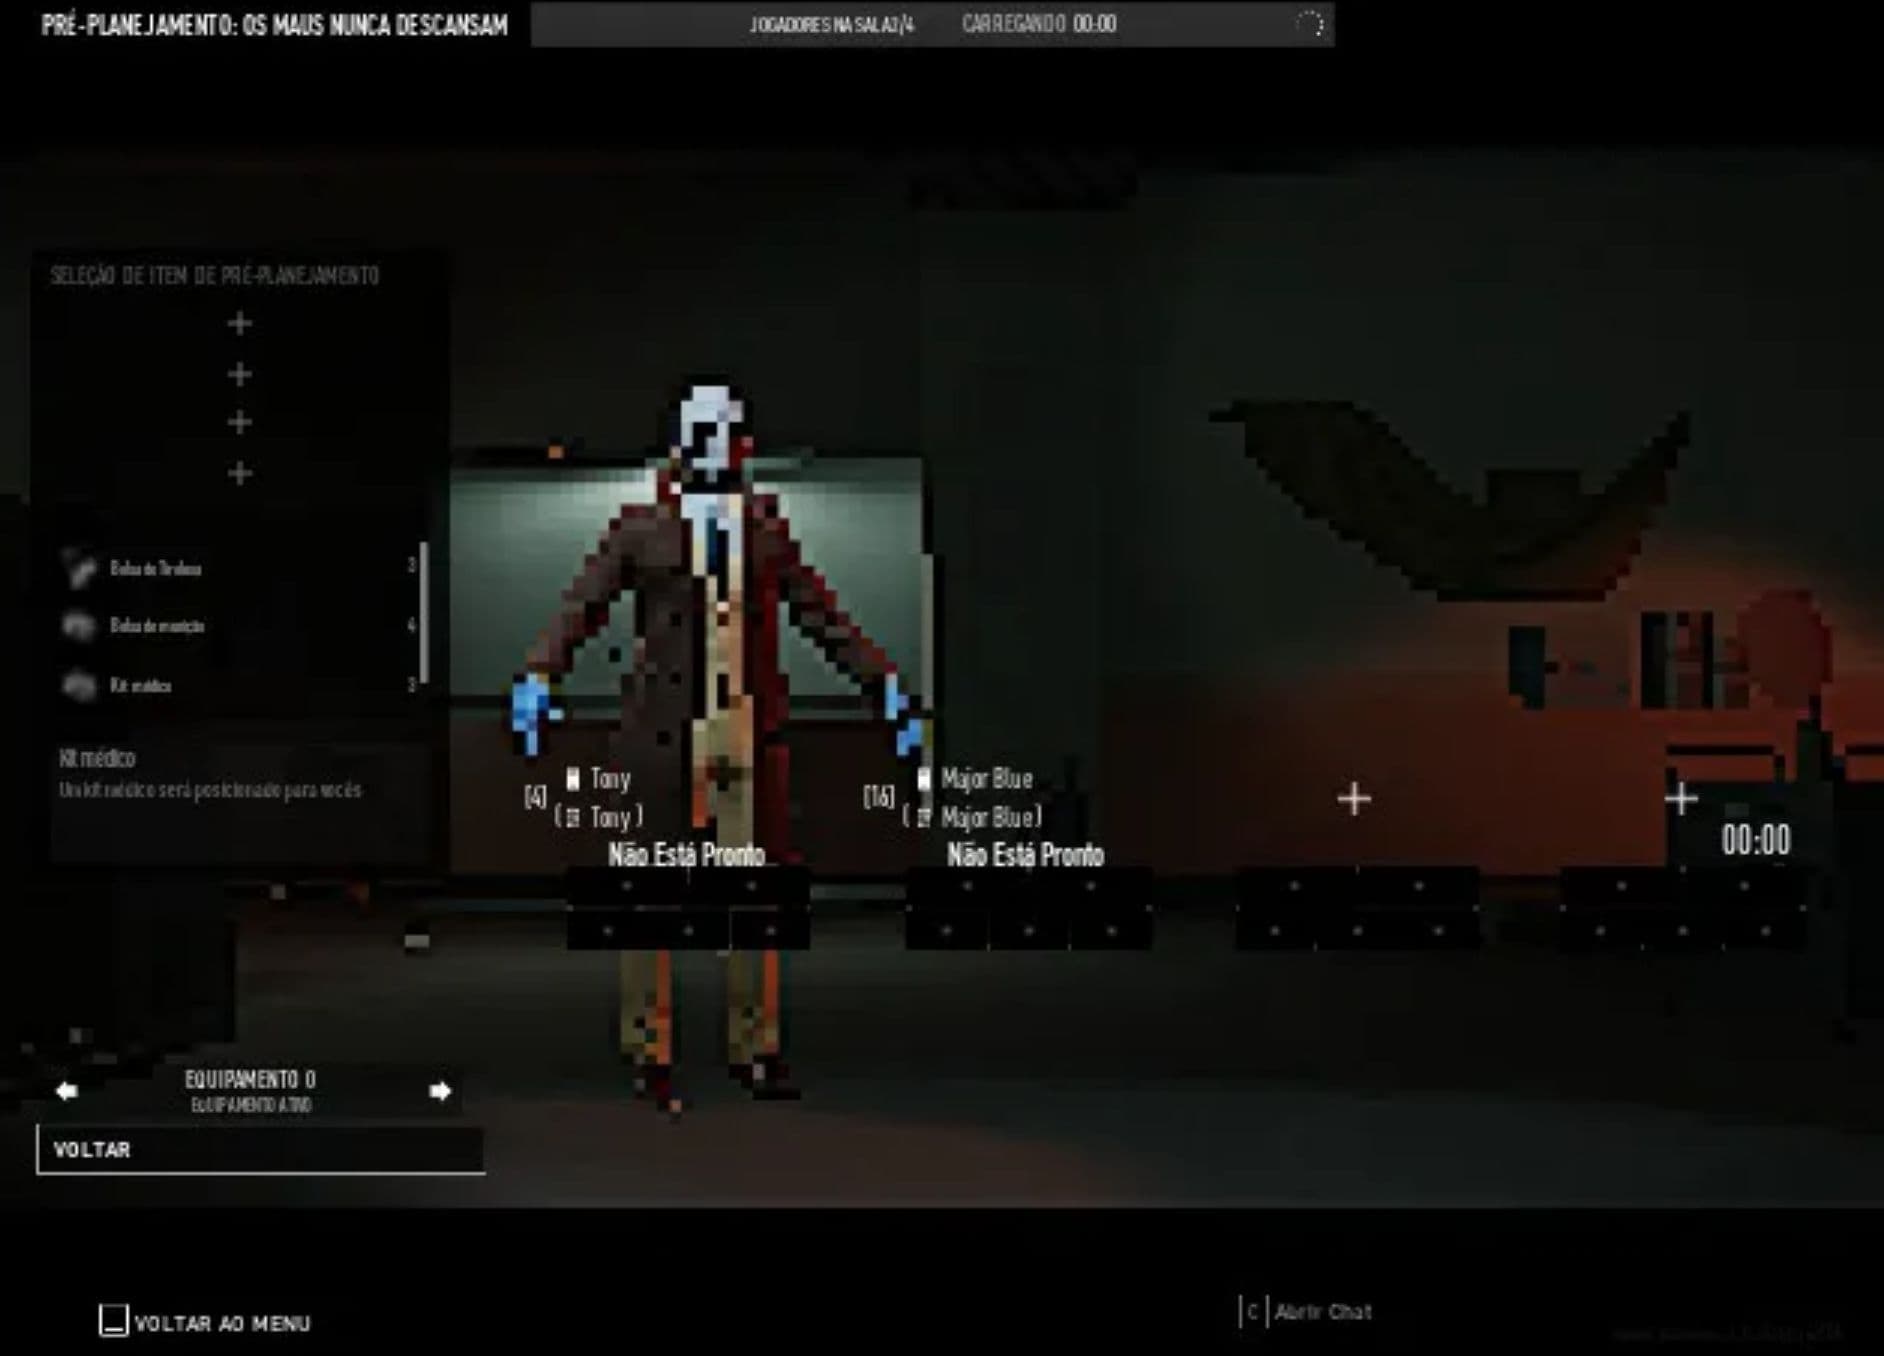 An Easy Payday 3 Gamepass Mod Installation Tutorial 